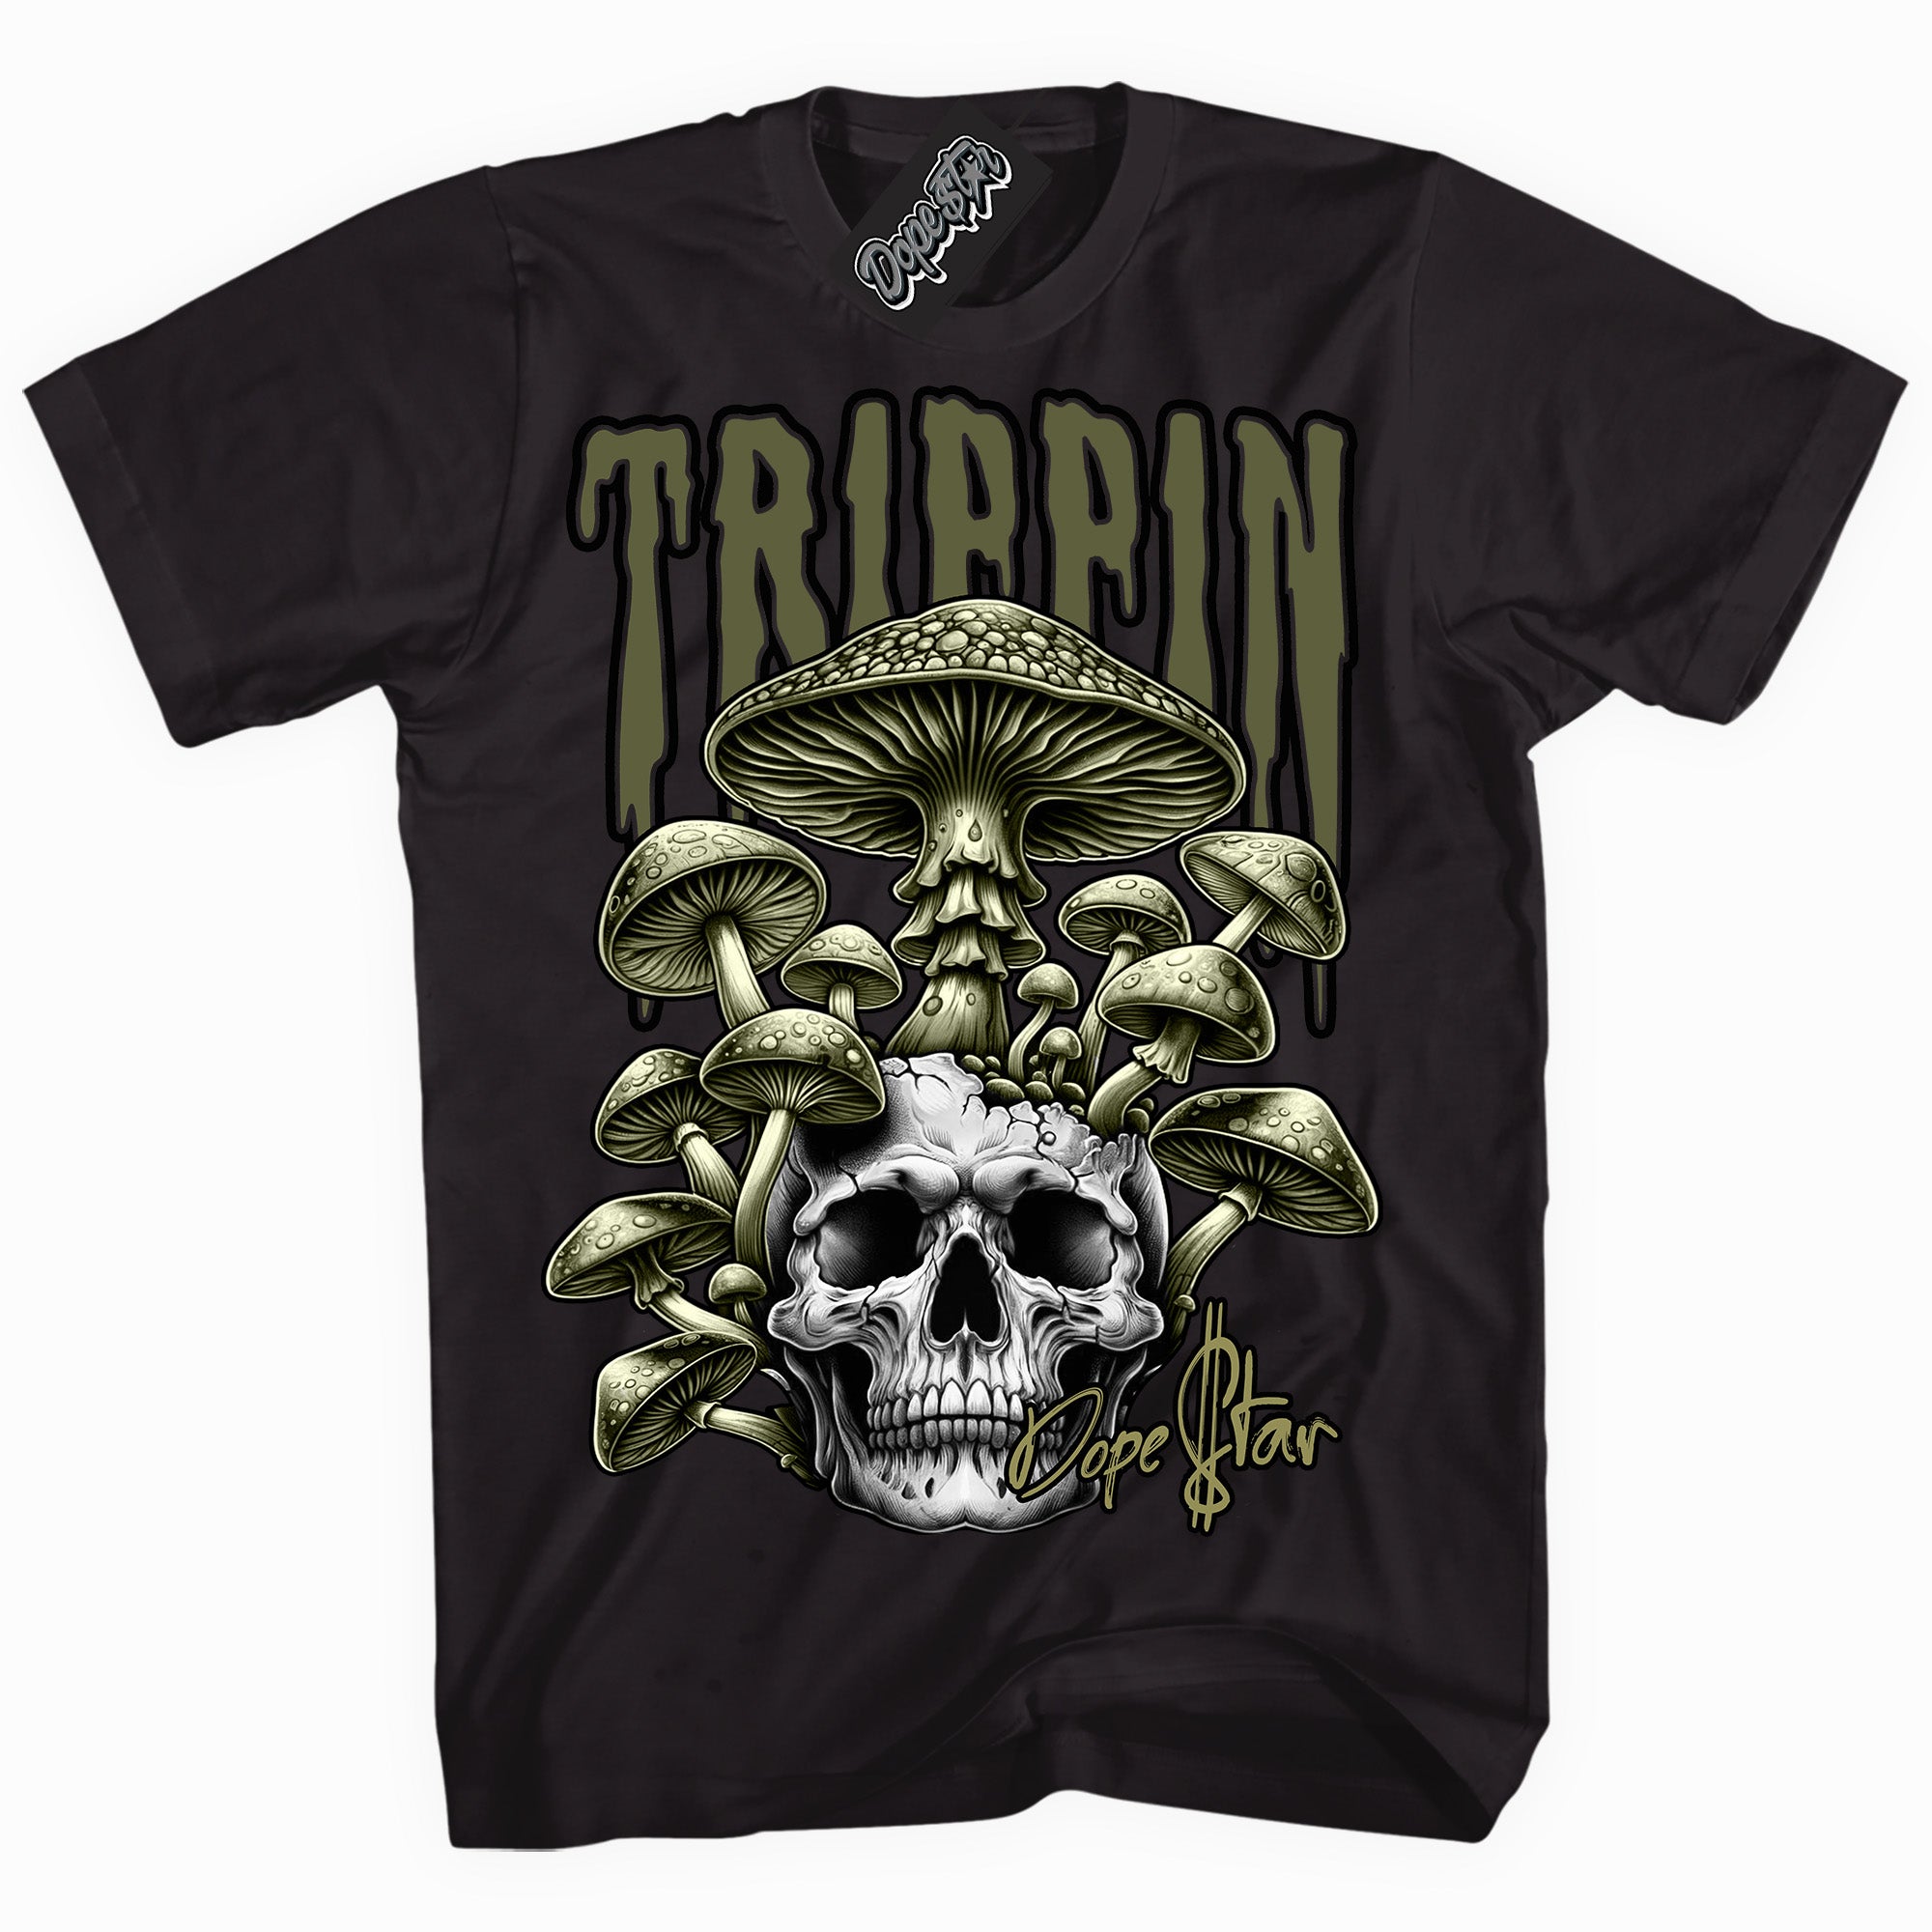 Cool Black graphic tee with “ Trippin ” print, that perfectly matches Craft Olive 4s sneakers